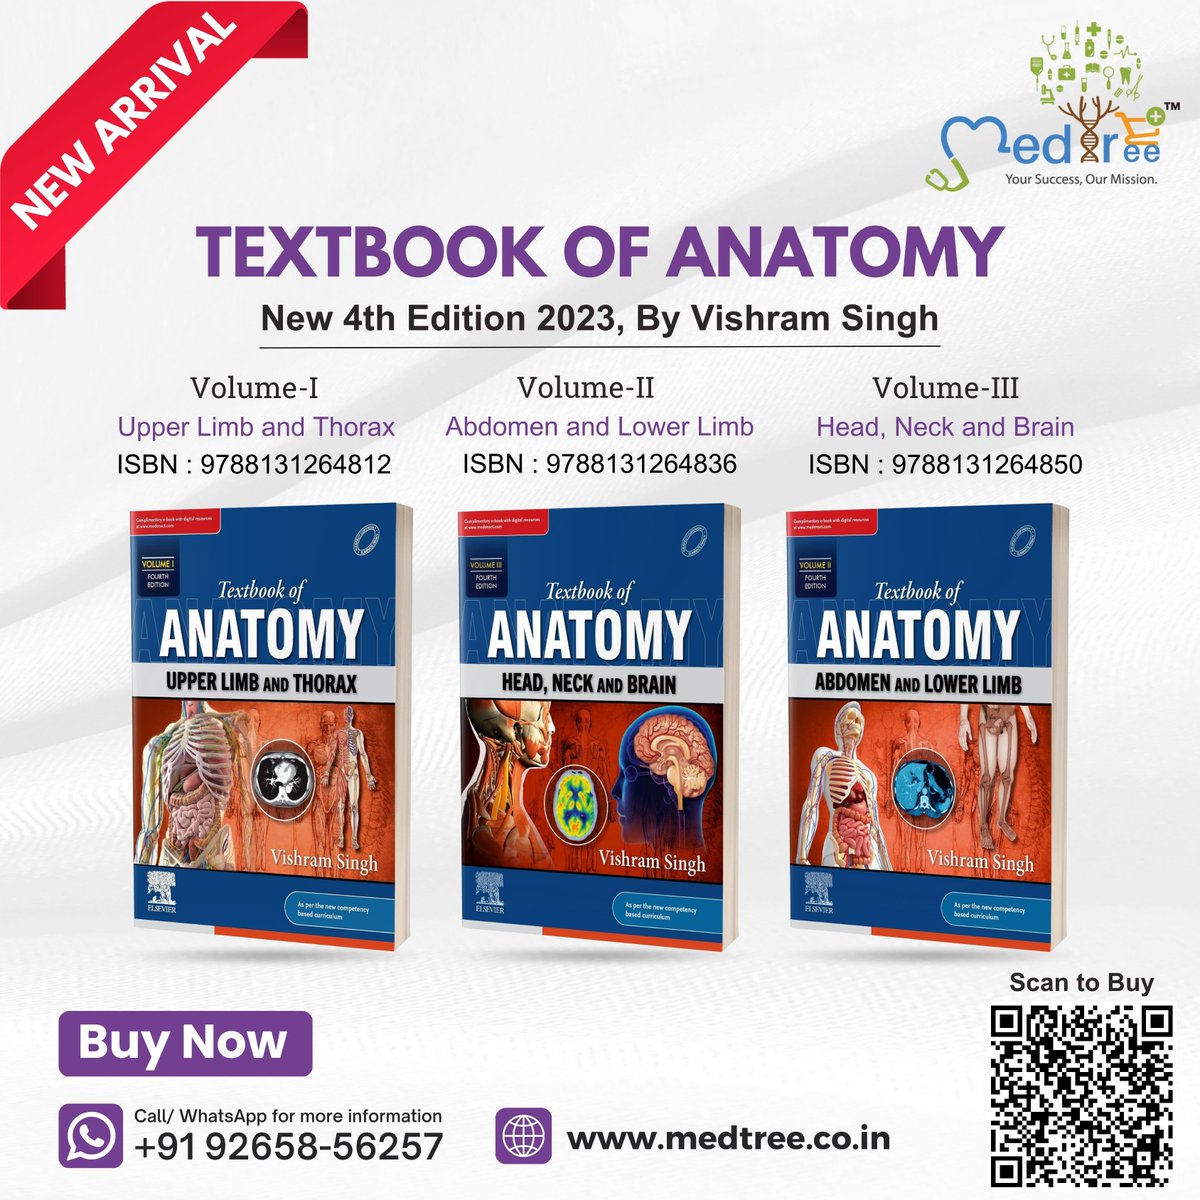 Textbook of Anatomy, 4th Ed 2023 by Vishram Singh
Buy: medtree.co.in/?s=Textbook+Of…

#anatomy #TextbookofAnatomy #mbbs #mbbs1styear #newedition #anatomystudy #anatomybook #anatomybooks #mbbsbooks #mbbsstudent #MBBSCollege #newarrivals #offers #discount #medtreeindia #MedTree #Elsevier